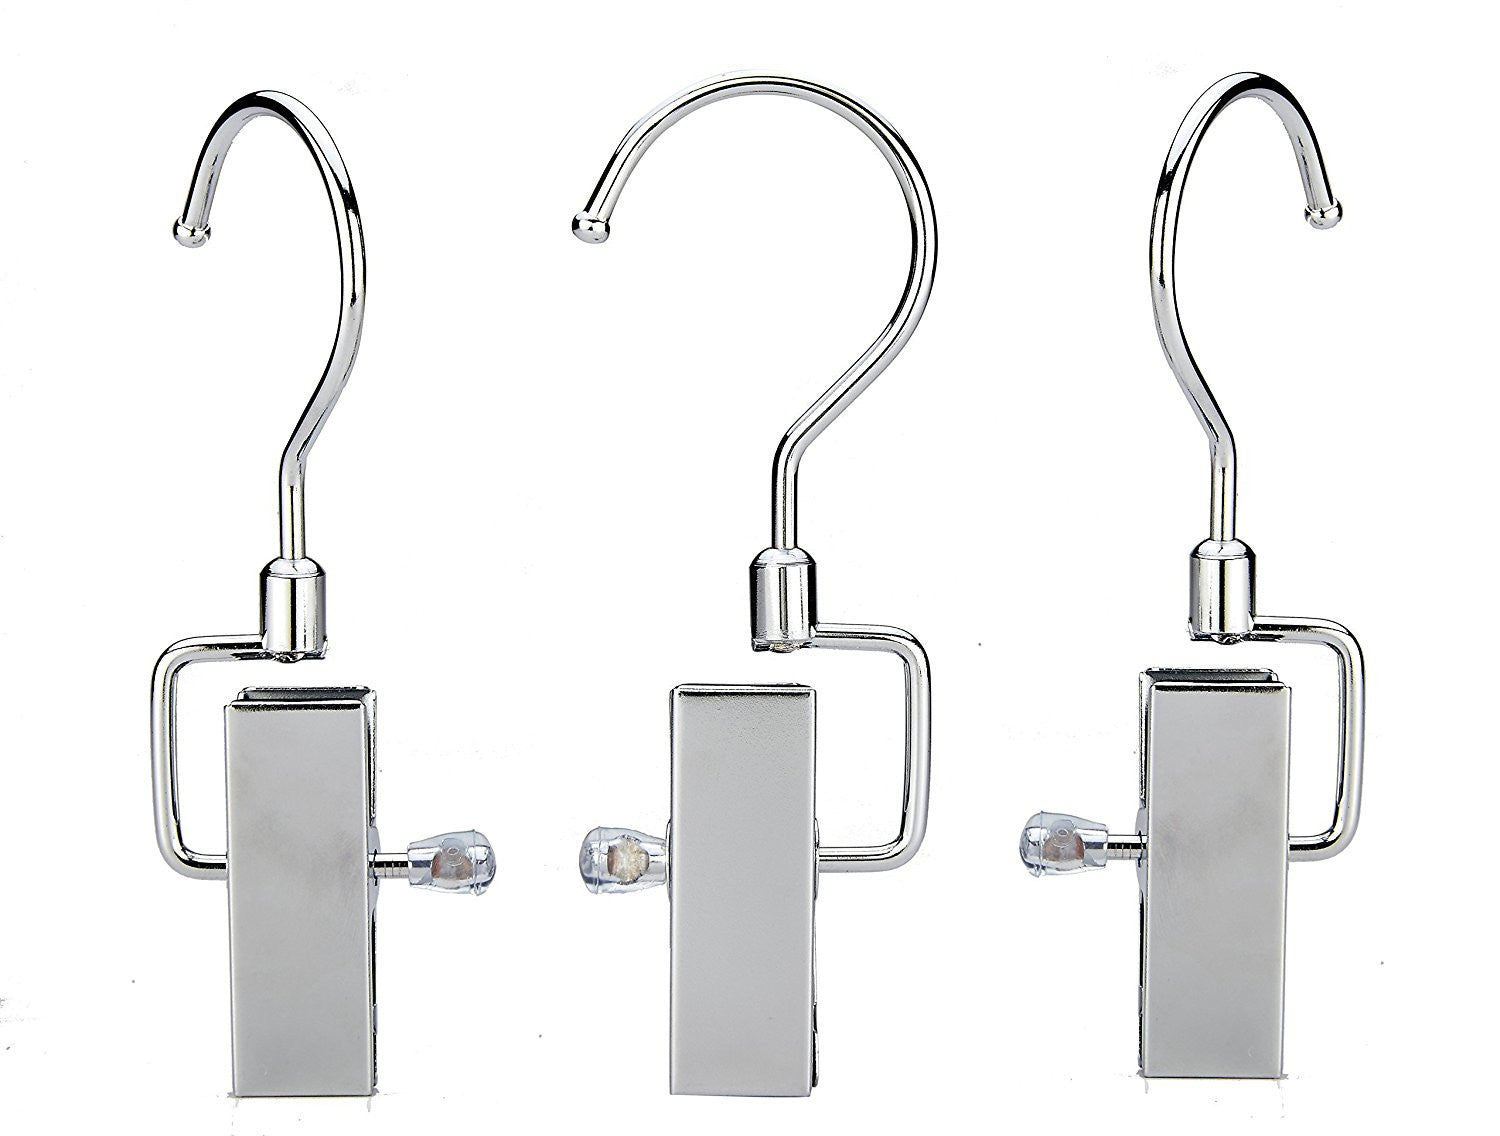 Pro Chef Kitchen Tools Stainless Steel Hanging Swivel Clip Hook - Set of 10  Swiveling Spring Clips with Hooks to Display Hang Boots, Caps, Hats,  Laundry Hanger Metal Clothespin Clamps Replacement –